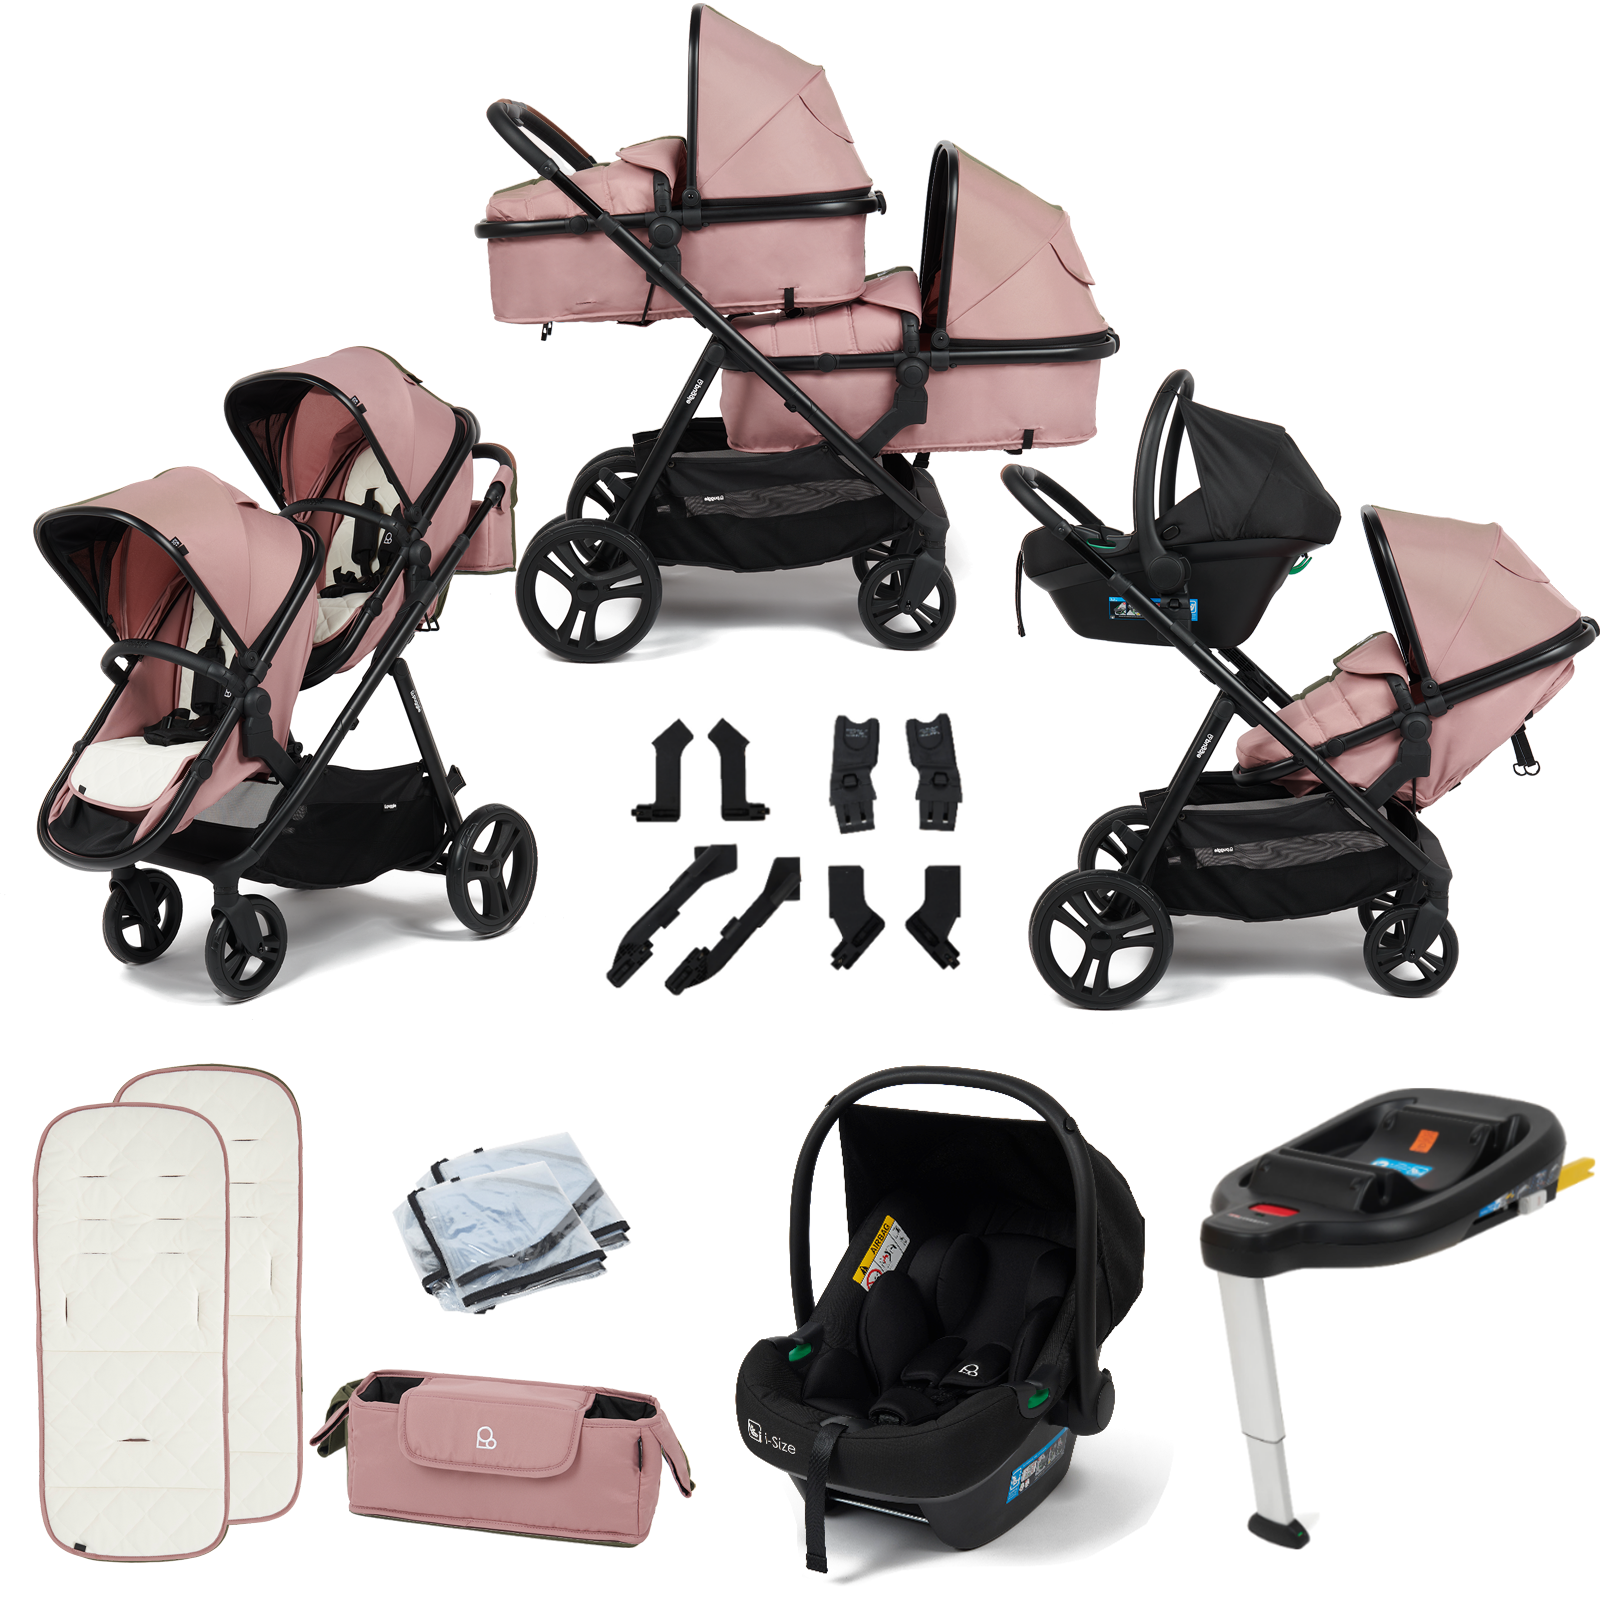 Puggle Memphis 2-in-1 Duo i-Size Double Twin Travel System with ISOFIX Base - Vintage Pink